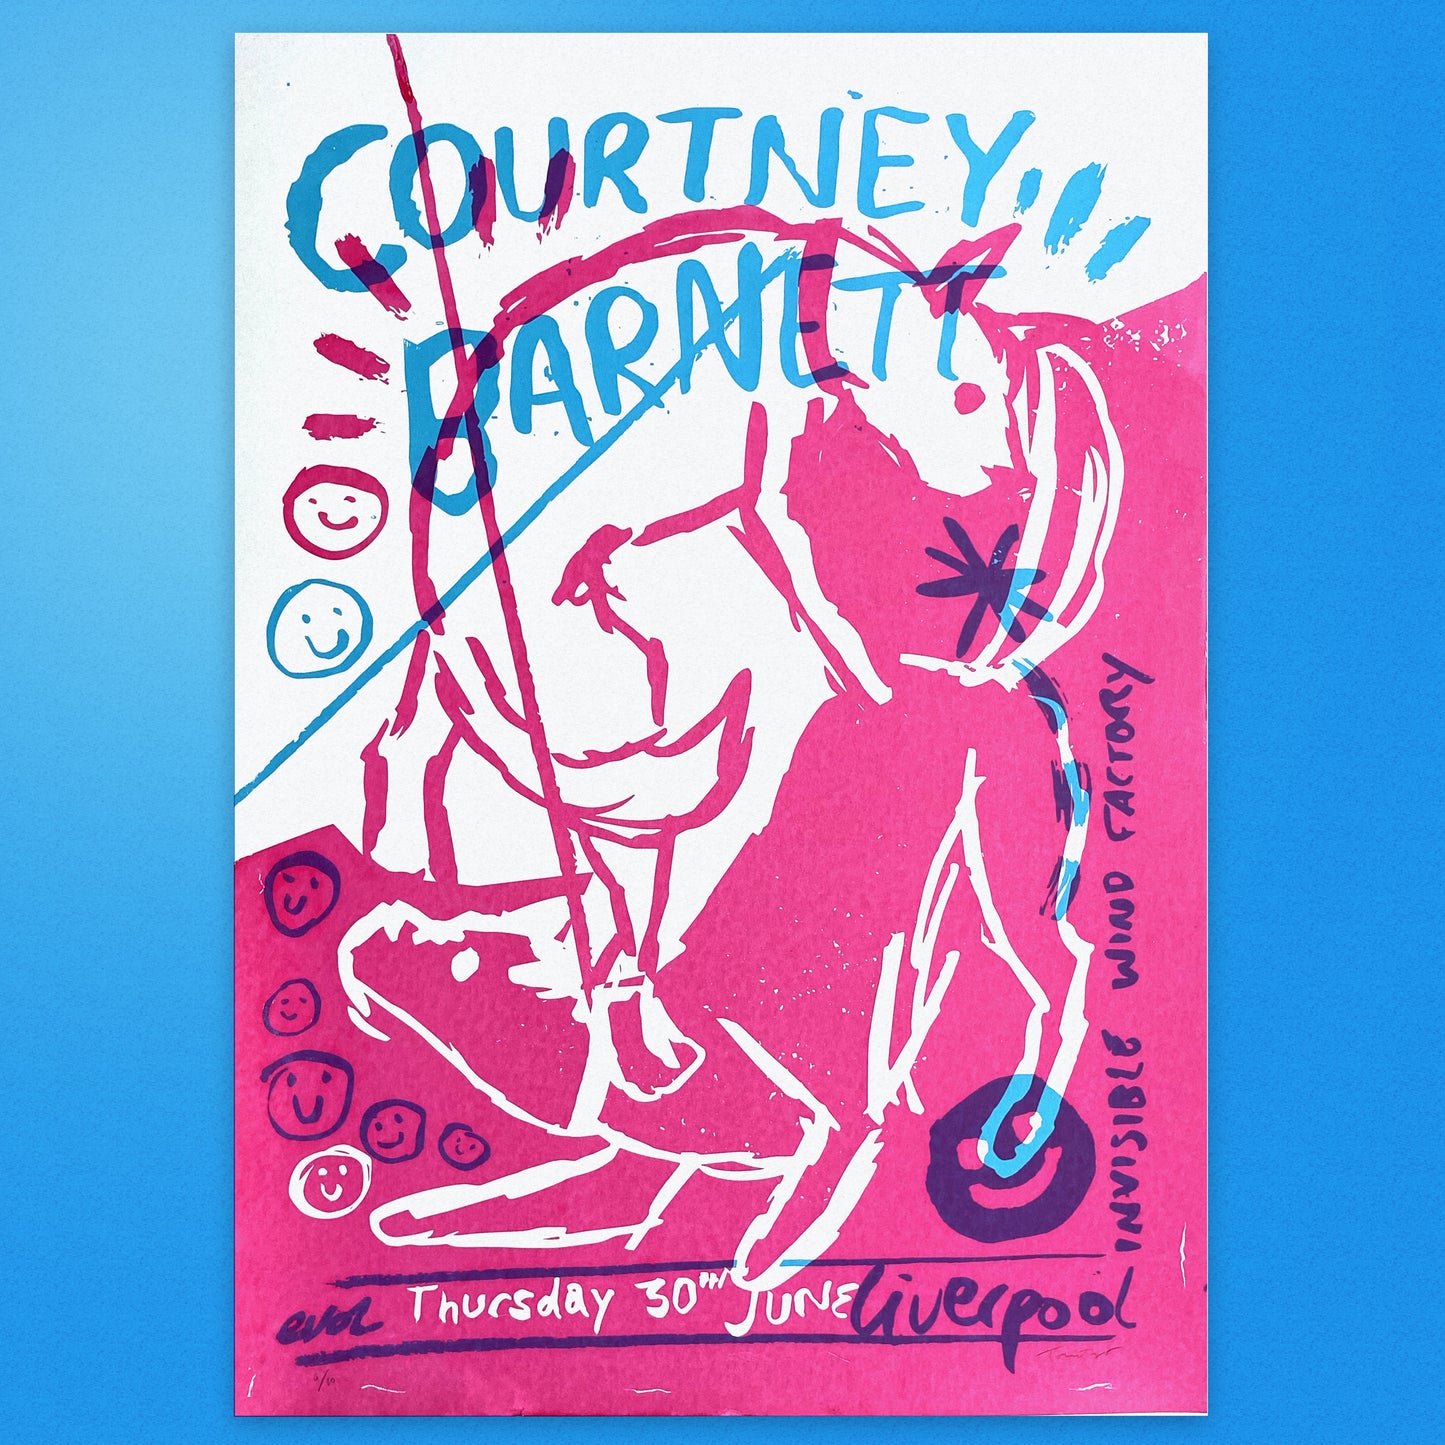 Courtney Barnett - Invisible Wind Factory 2022